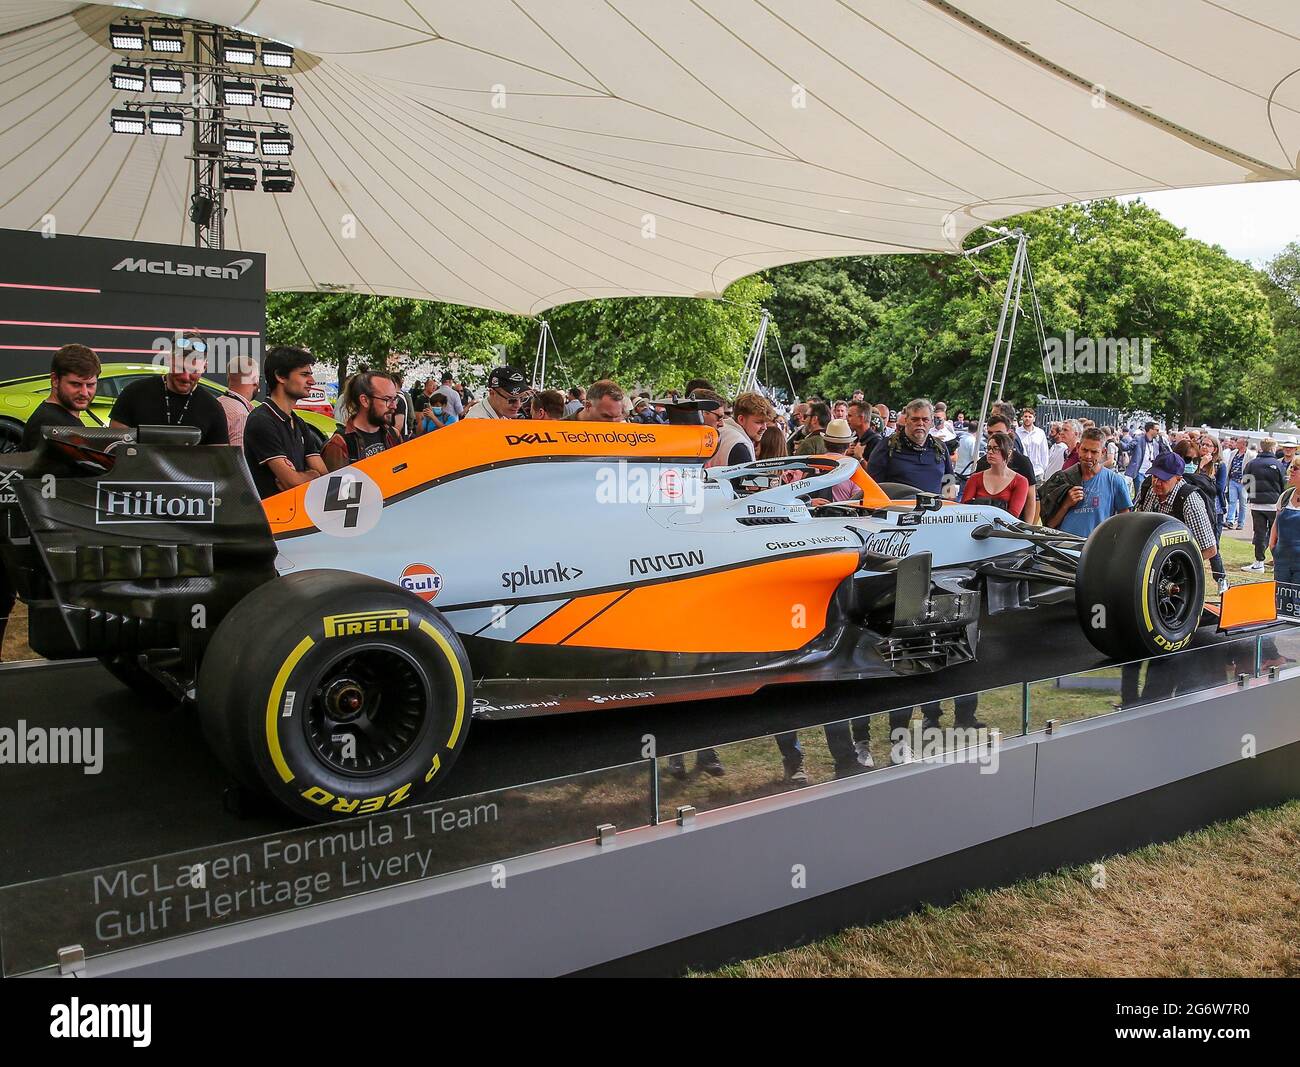 GOODWOOD Motor Circuit, 8th July 2021  McLaren F1 Gulf Heritage Livery car on show to fans during the Festival of Speed, Chichester, United Kingdom Stock Photo